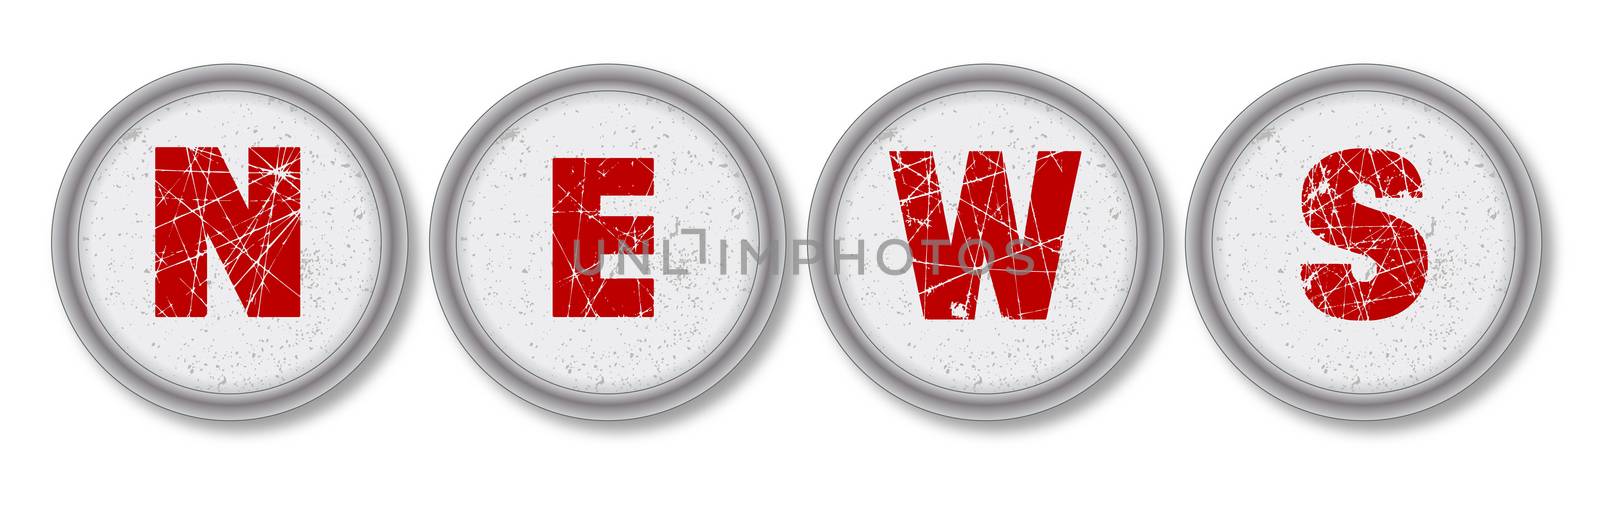 Four typewriter key pads spelling out the word NEWS over a white background